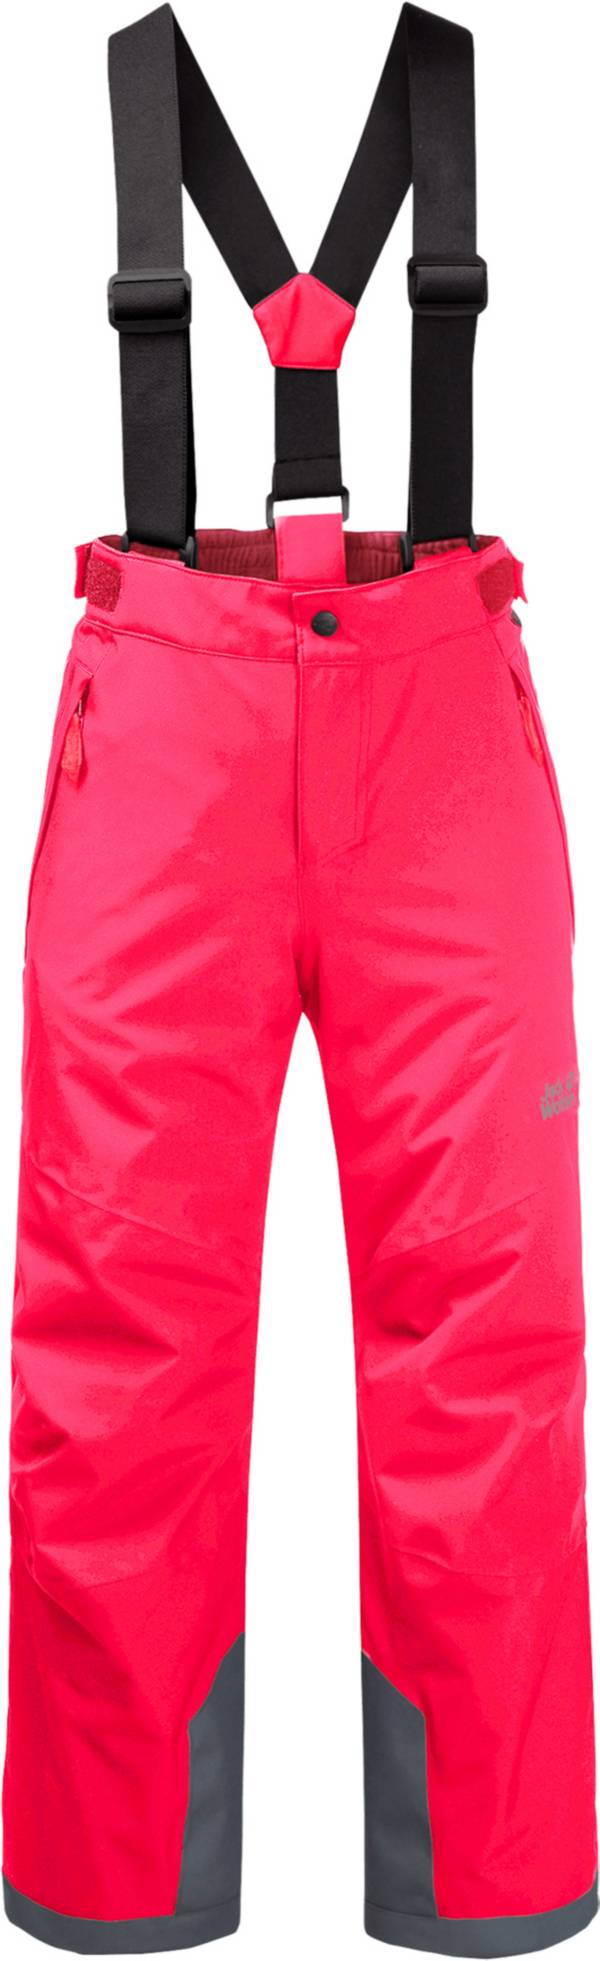 Jack Wolfskin Kids' Great Snow Day Pants product image